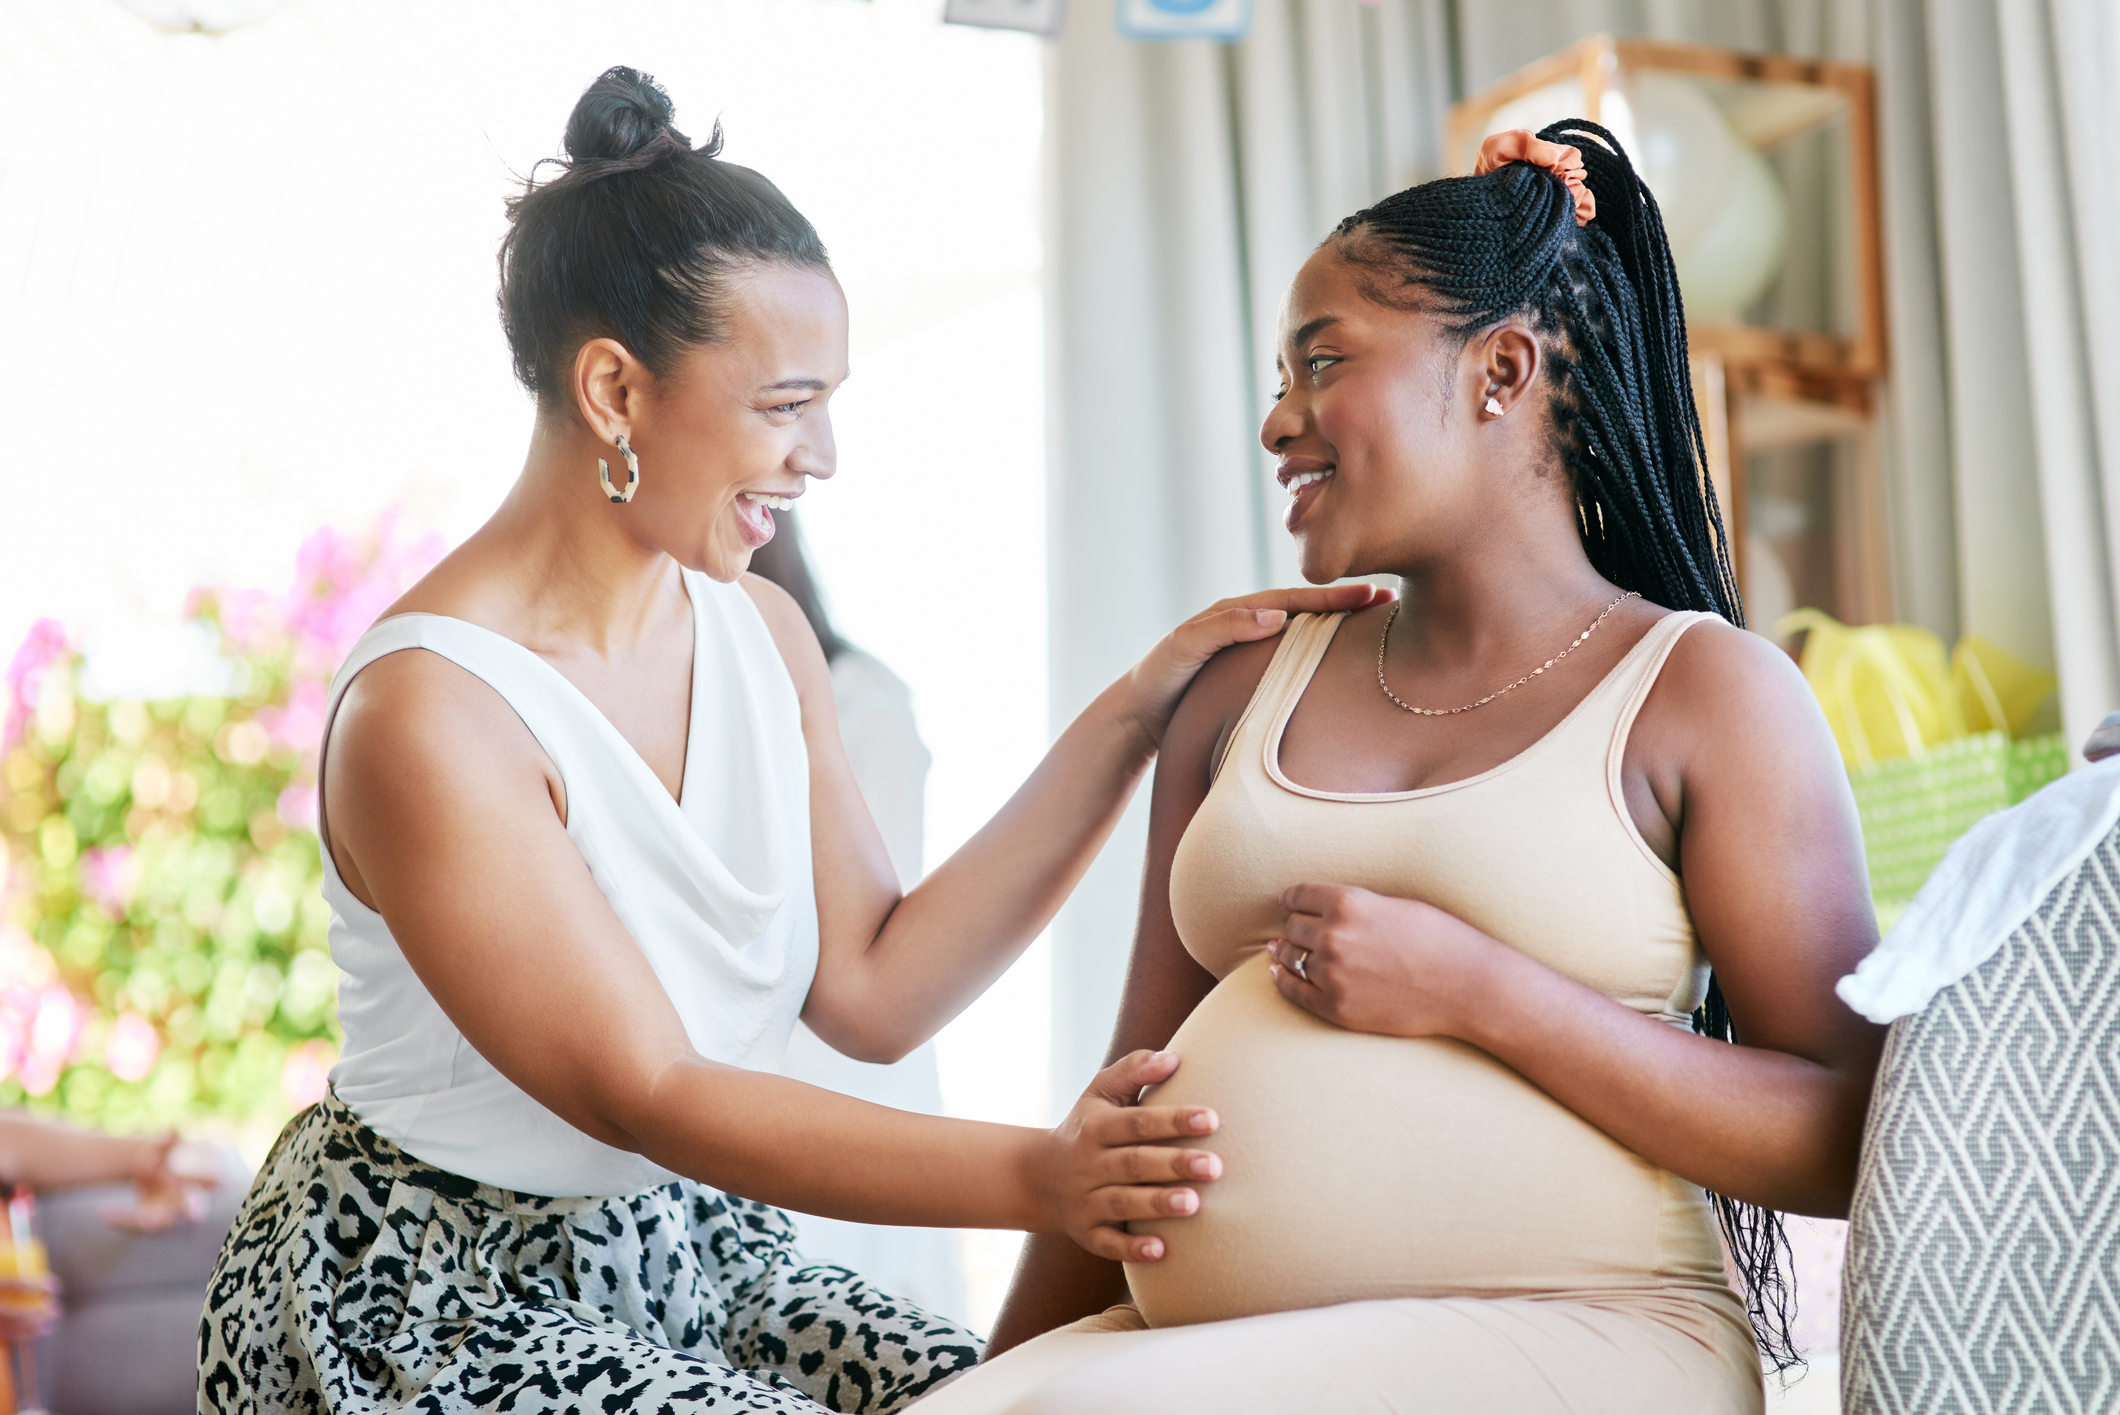 A woman touches her pregnant friend's belly while they smile